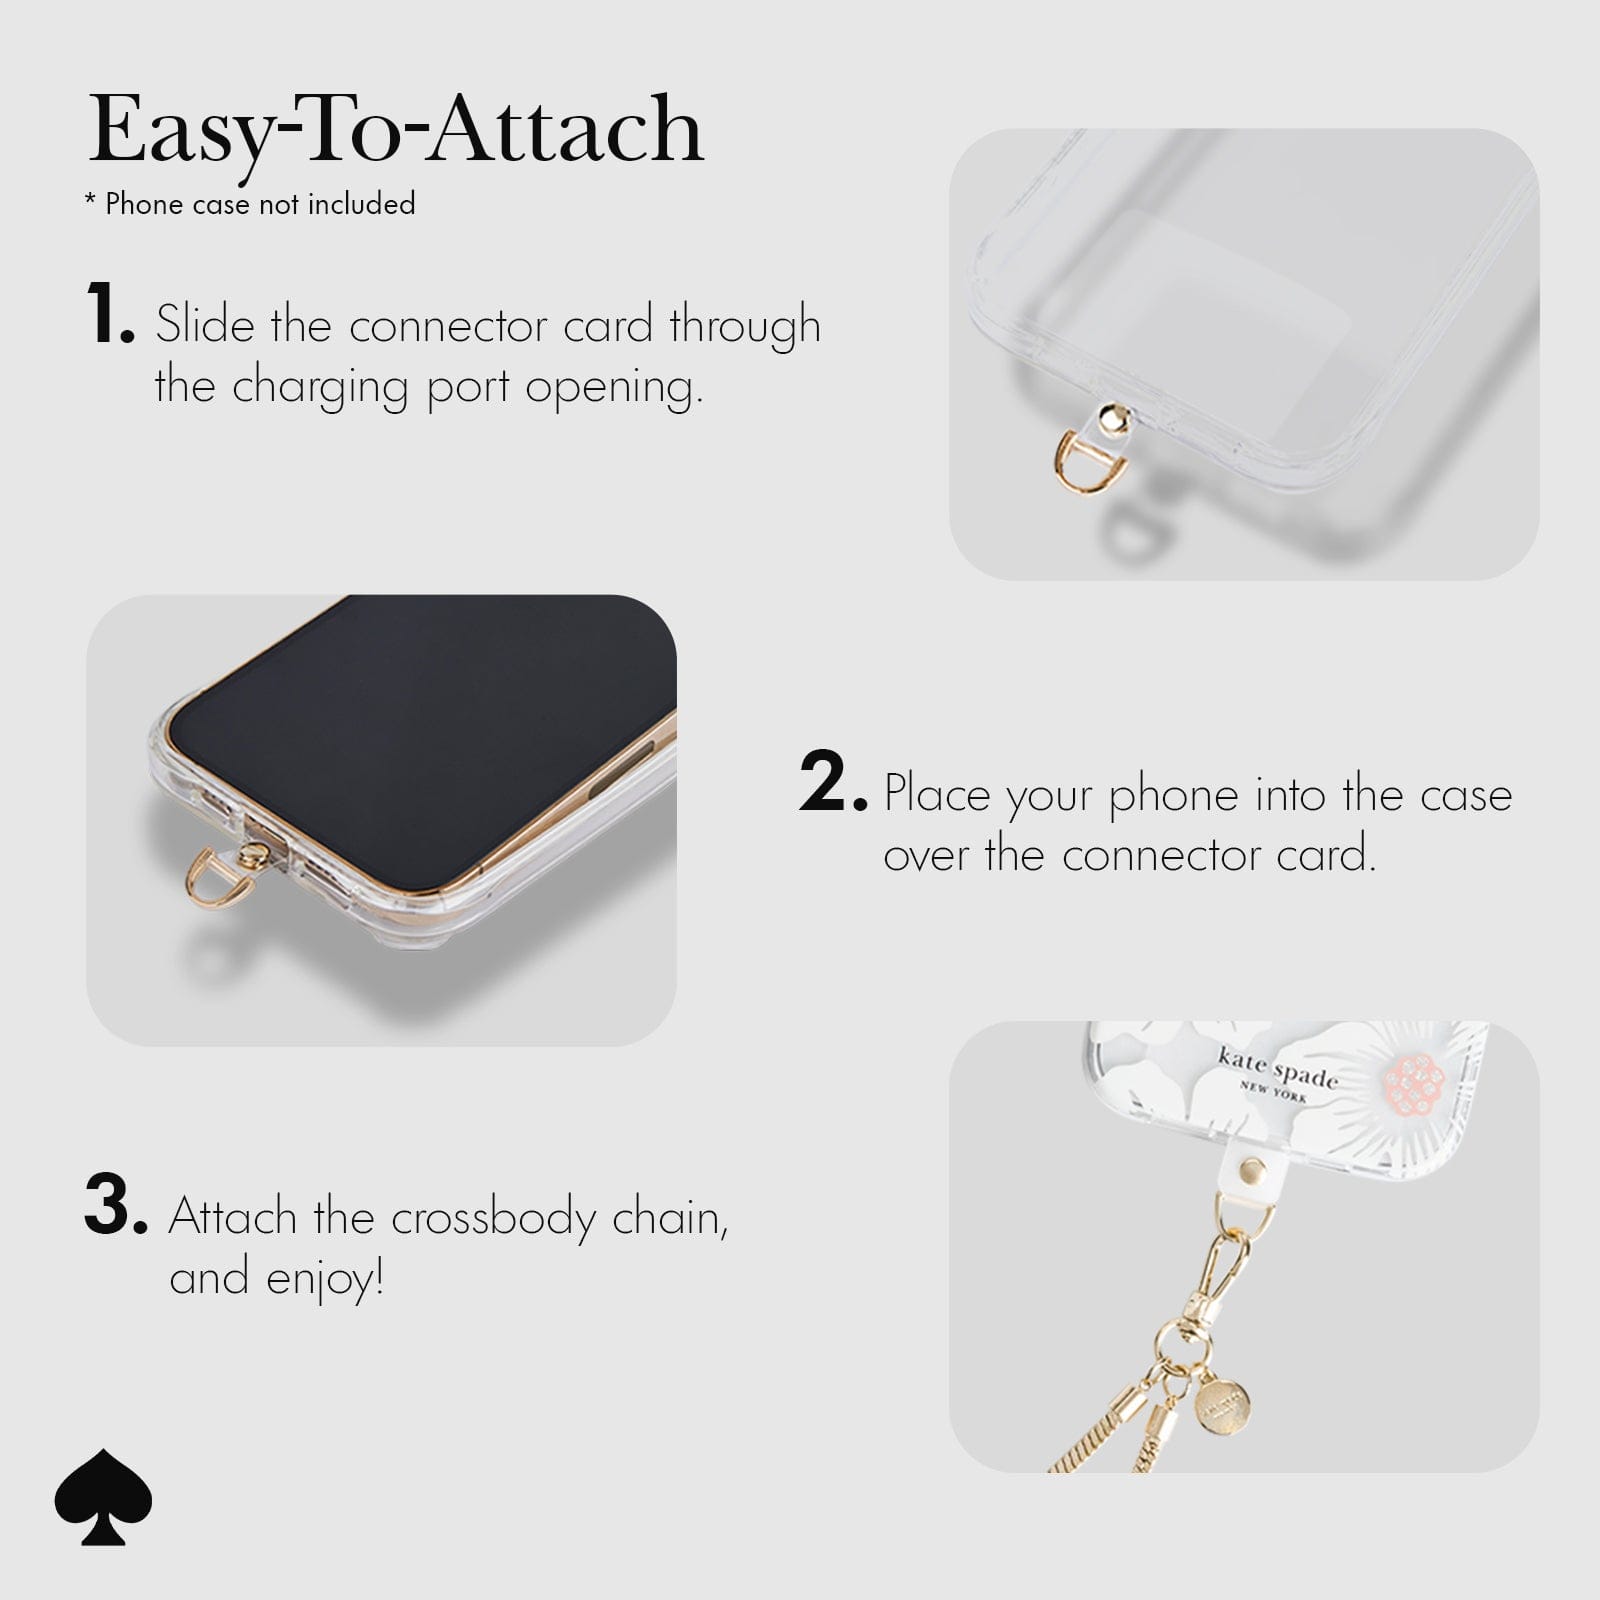 EASY TO ATTACH. 1. SLIDE THE CONNECTOR CARD THROUGH THE CHARGING PORT OPENING. 2. PLACE YOUR PHONE INTO THE CASE OVER THE CONNECTOR CARD. 3. ATTACH THE CROSSBODY CHAIN, AND ENJOY!